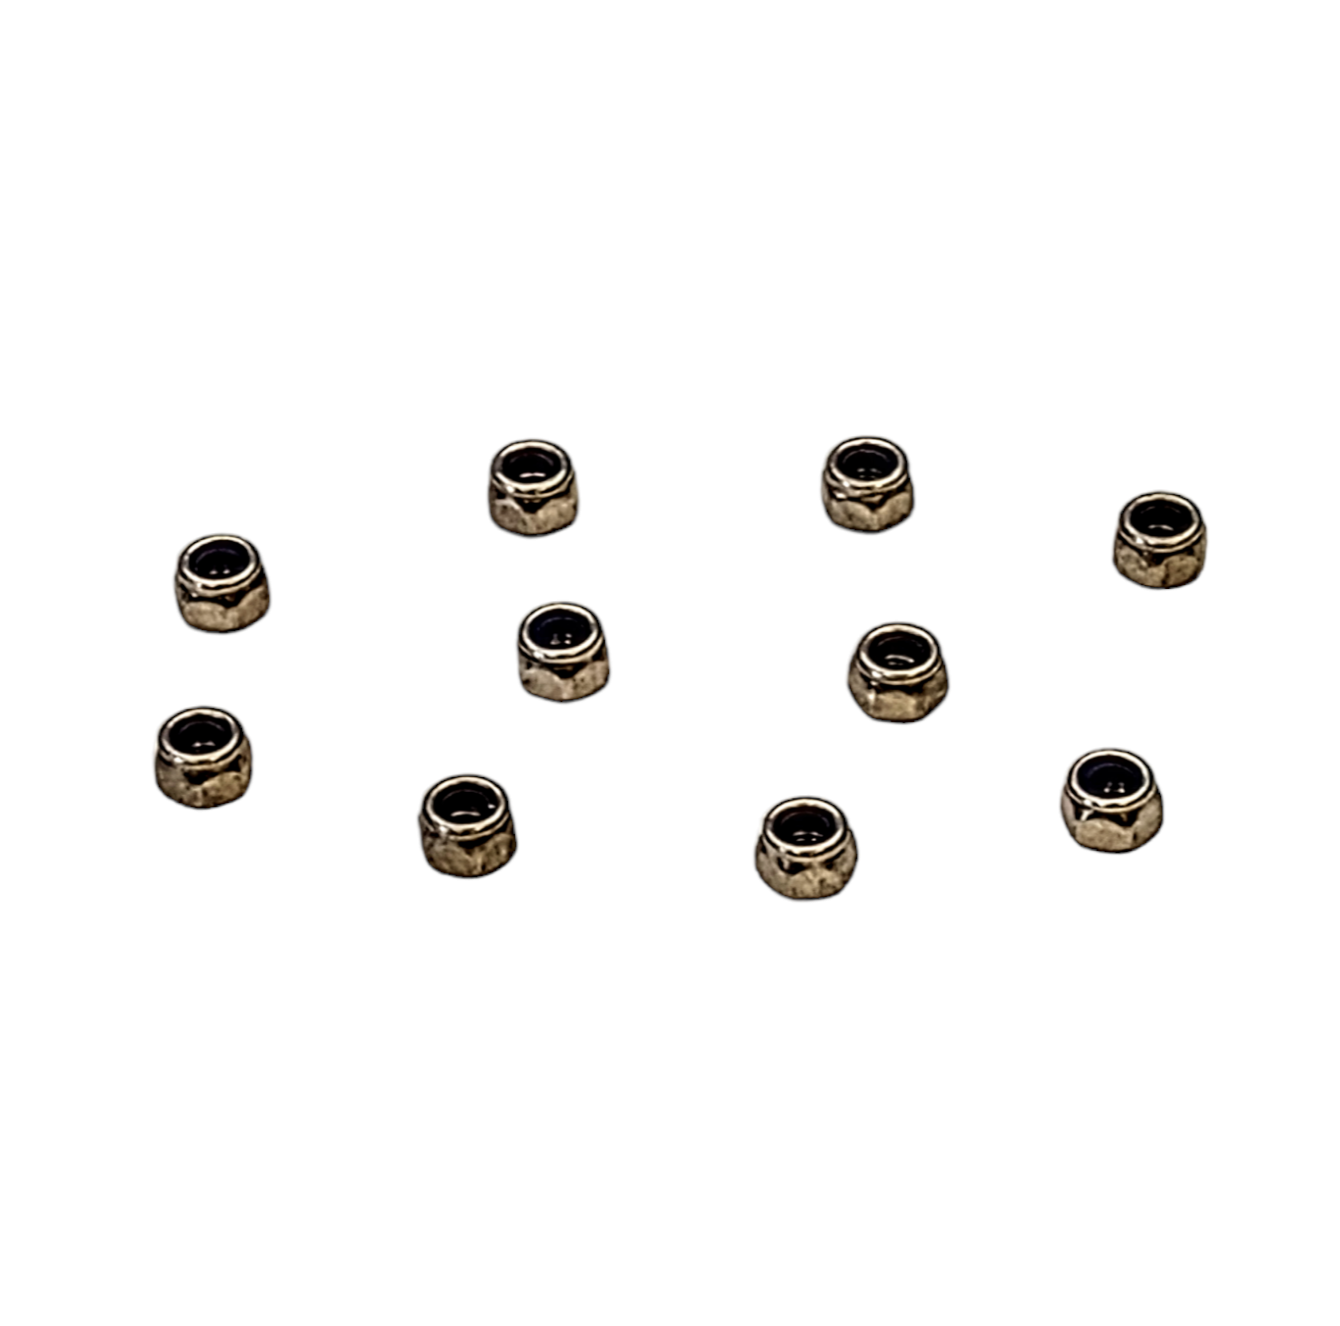 A31402 Pack of 10 M4 Nylon insert nuts